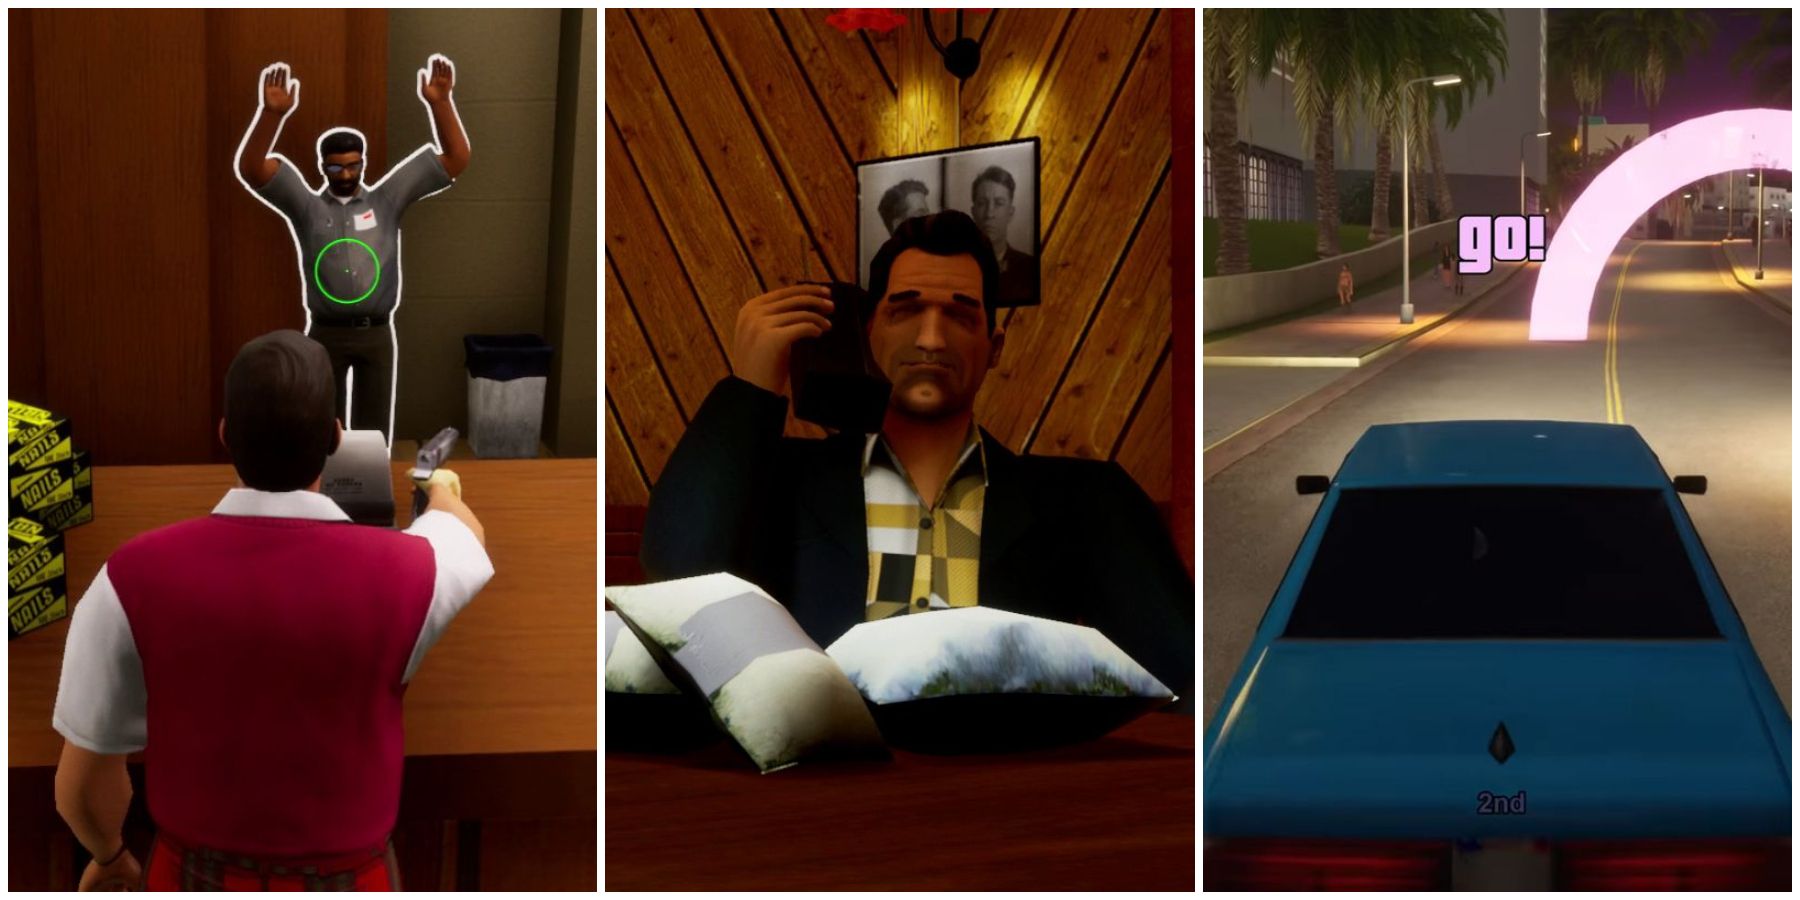 Is GTA Vice City Stories fun to play in 2021?